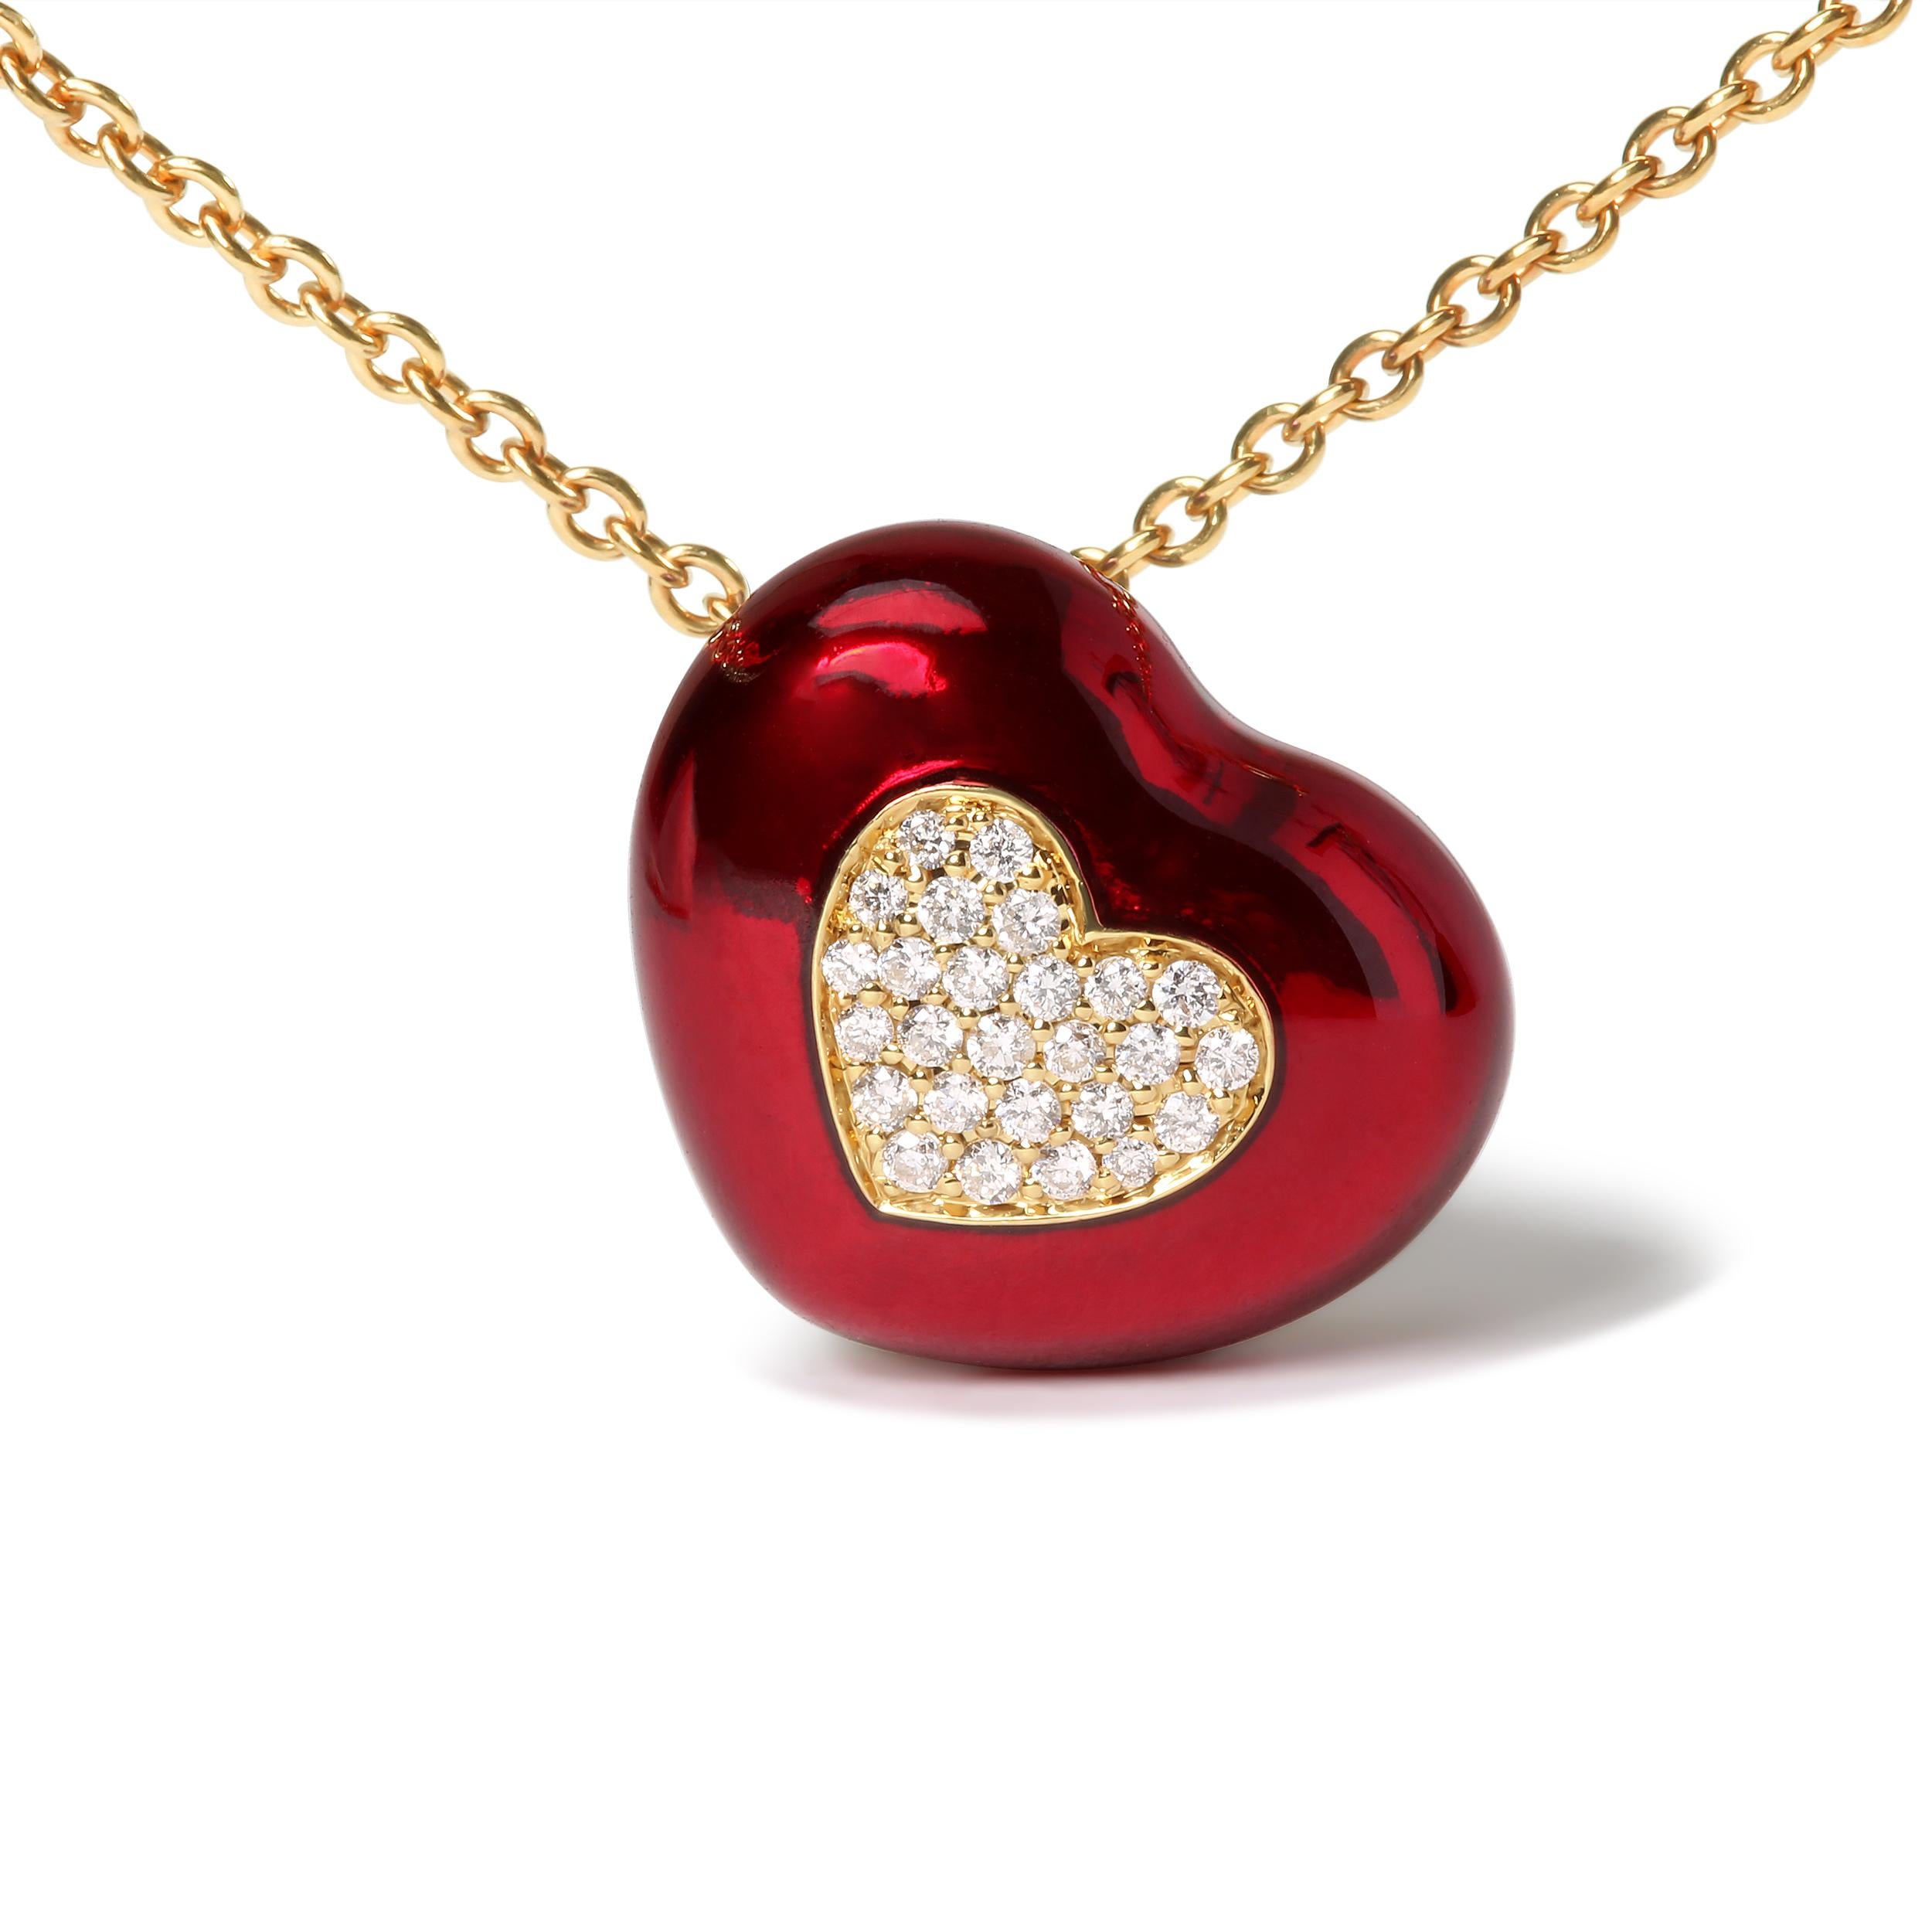 Show her your heart is all in with this meaningful pendant necklace crafted of genuine 18k yellow gold with red enamel. The red enamel outlines a heart silhouette while inside rests a cluster of round, prong-set diamonds also forming a heart motif.